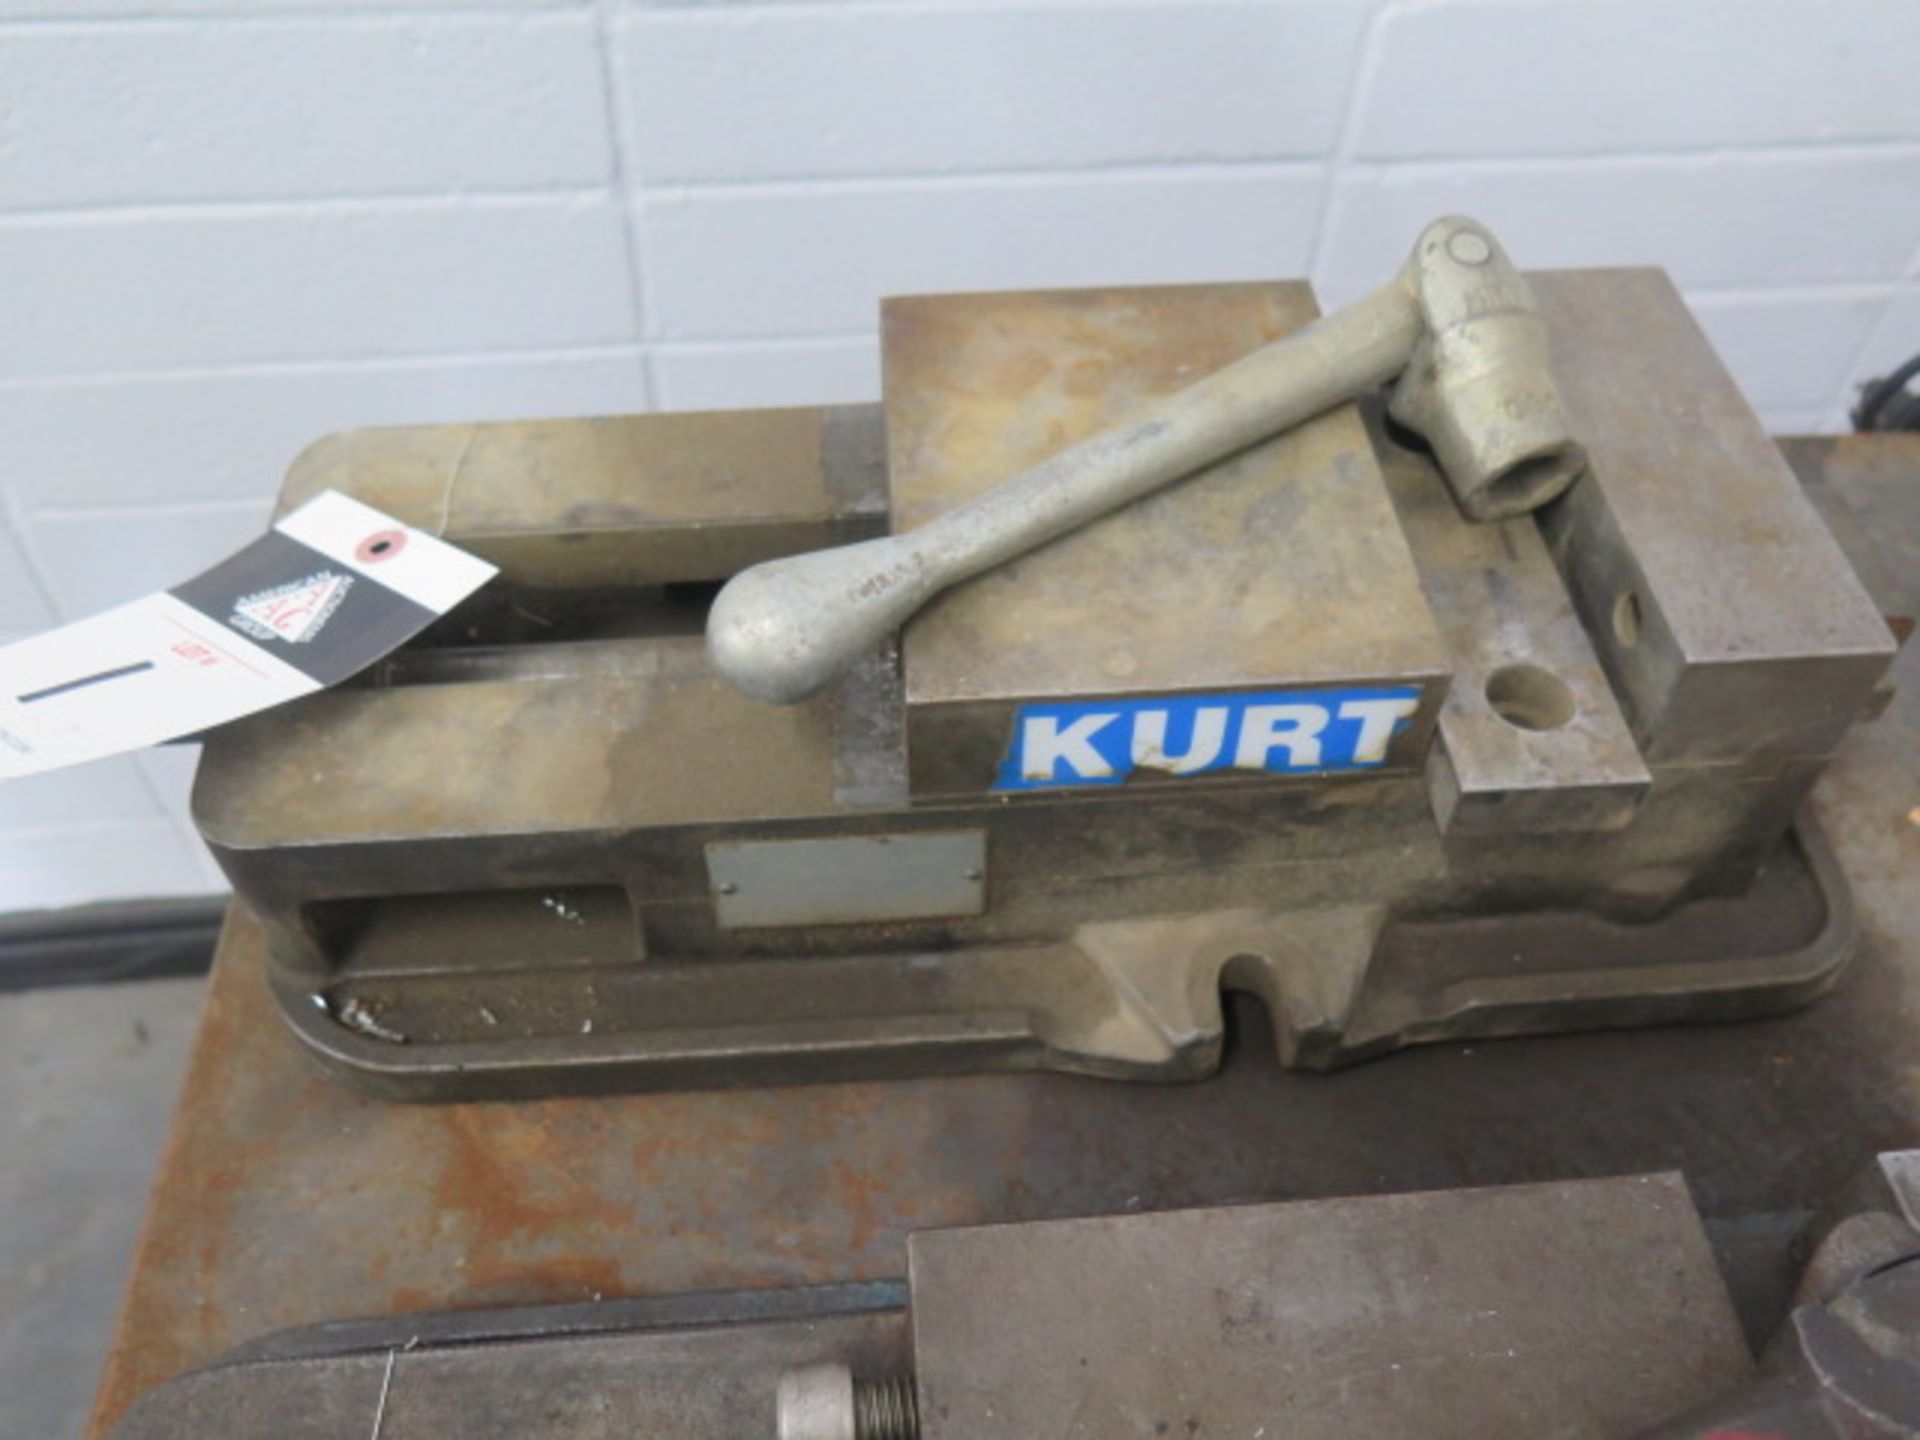 Kurt 6” Angle-lock Vise (SOLD AS-IS - NO WARRANTY) - Image 2 of 2